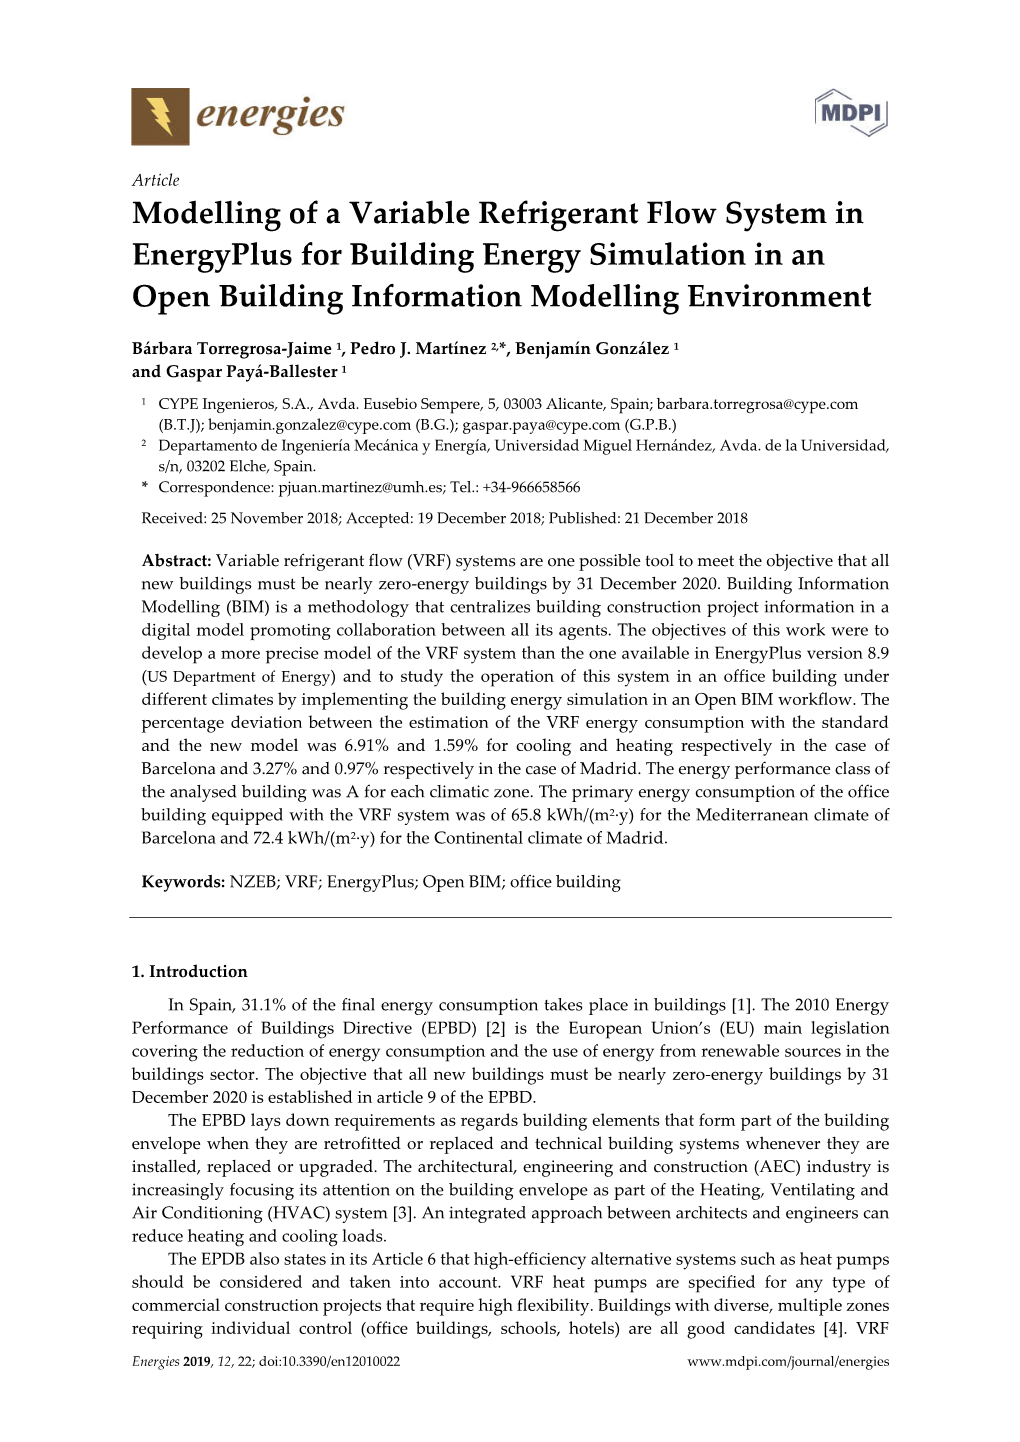 Modelling of a Variable Refrigerant Flow System in Energyplus for Building Energy Simulation in an Open Building Information Modelling Environment